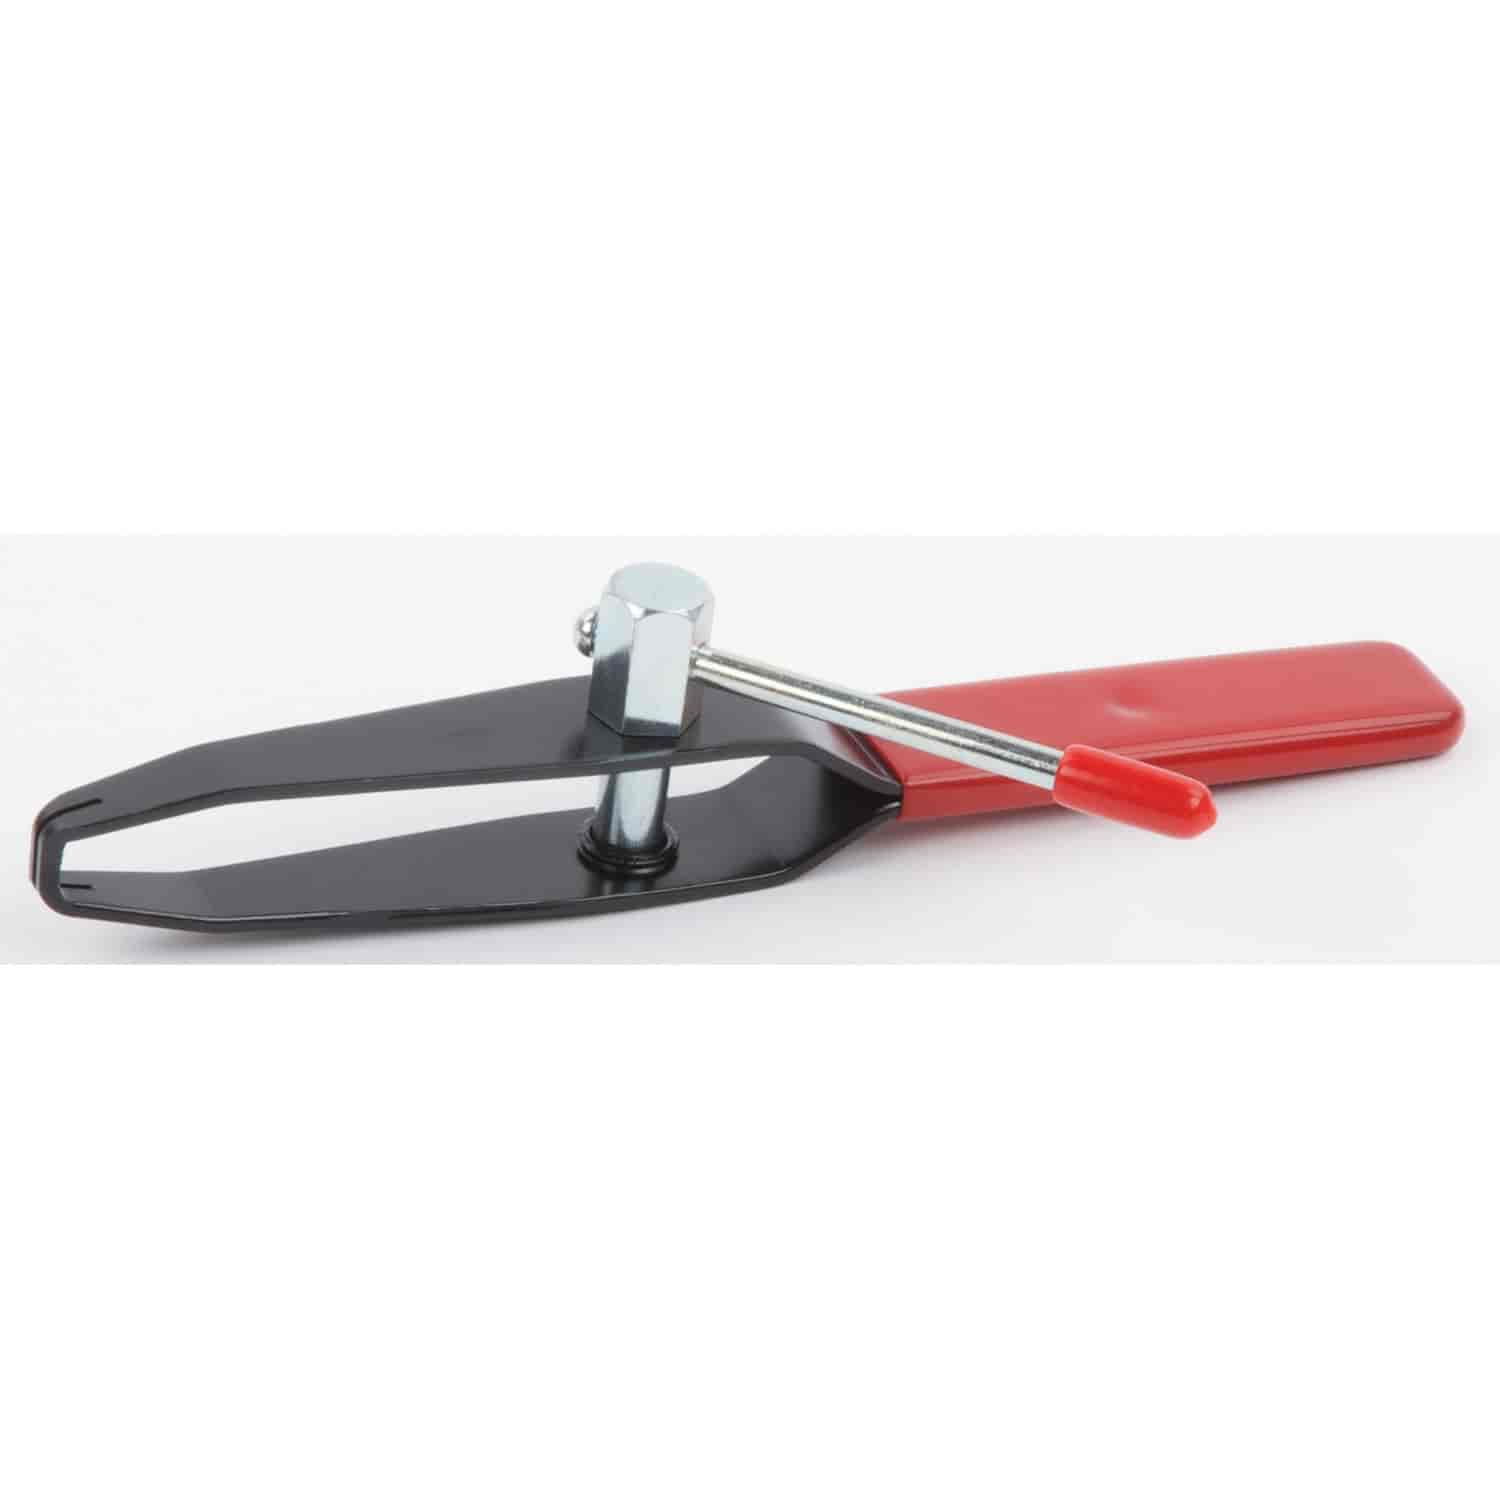 Cable Tie Tool For Installing Stainless Wire and Cable Ties